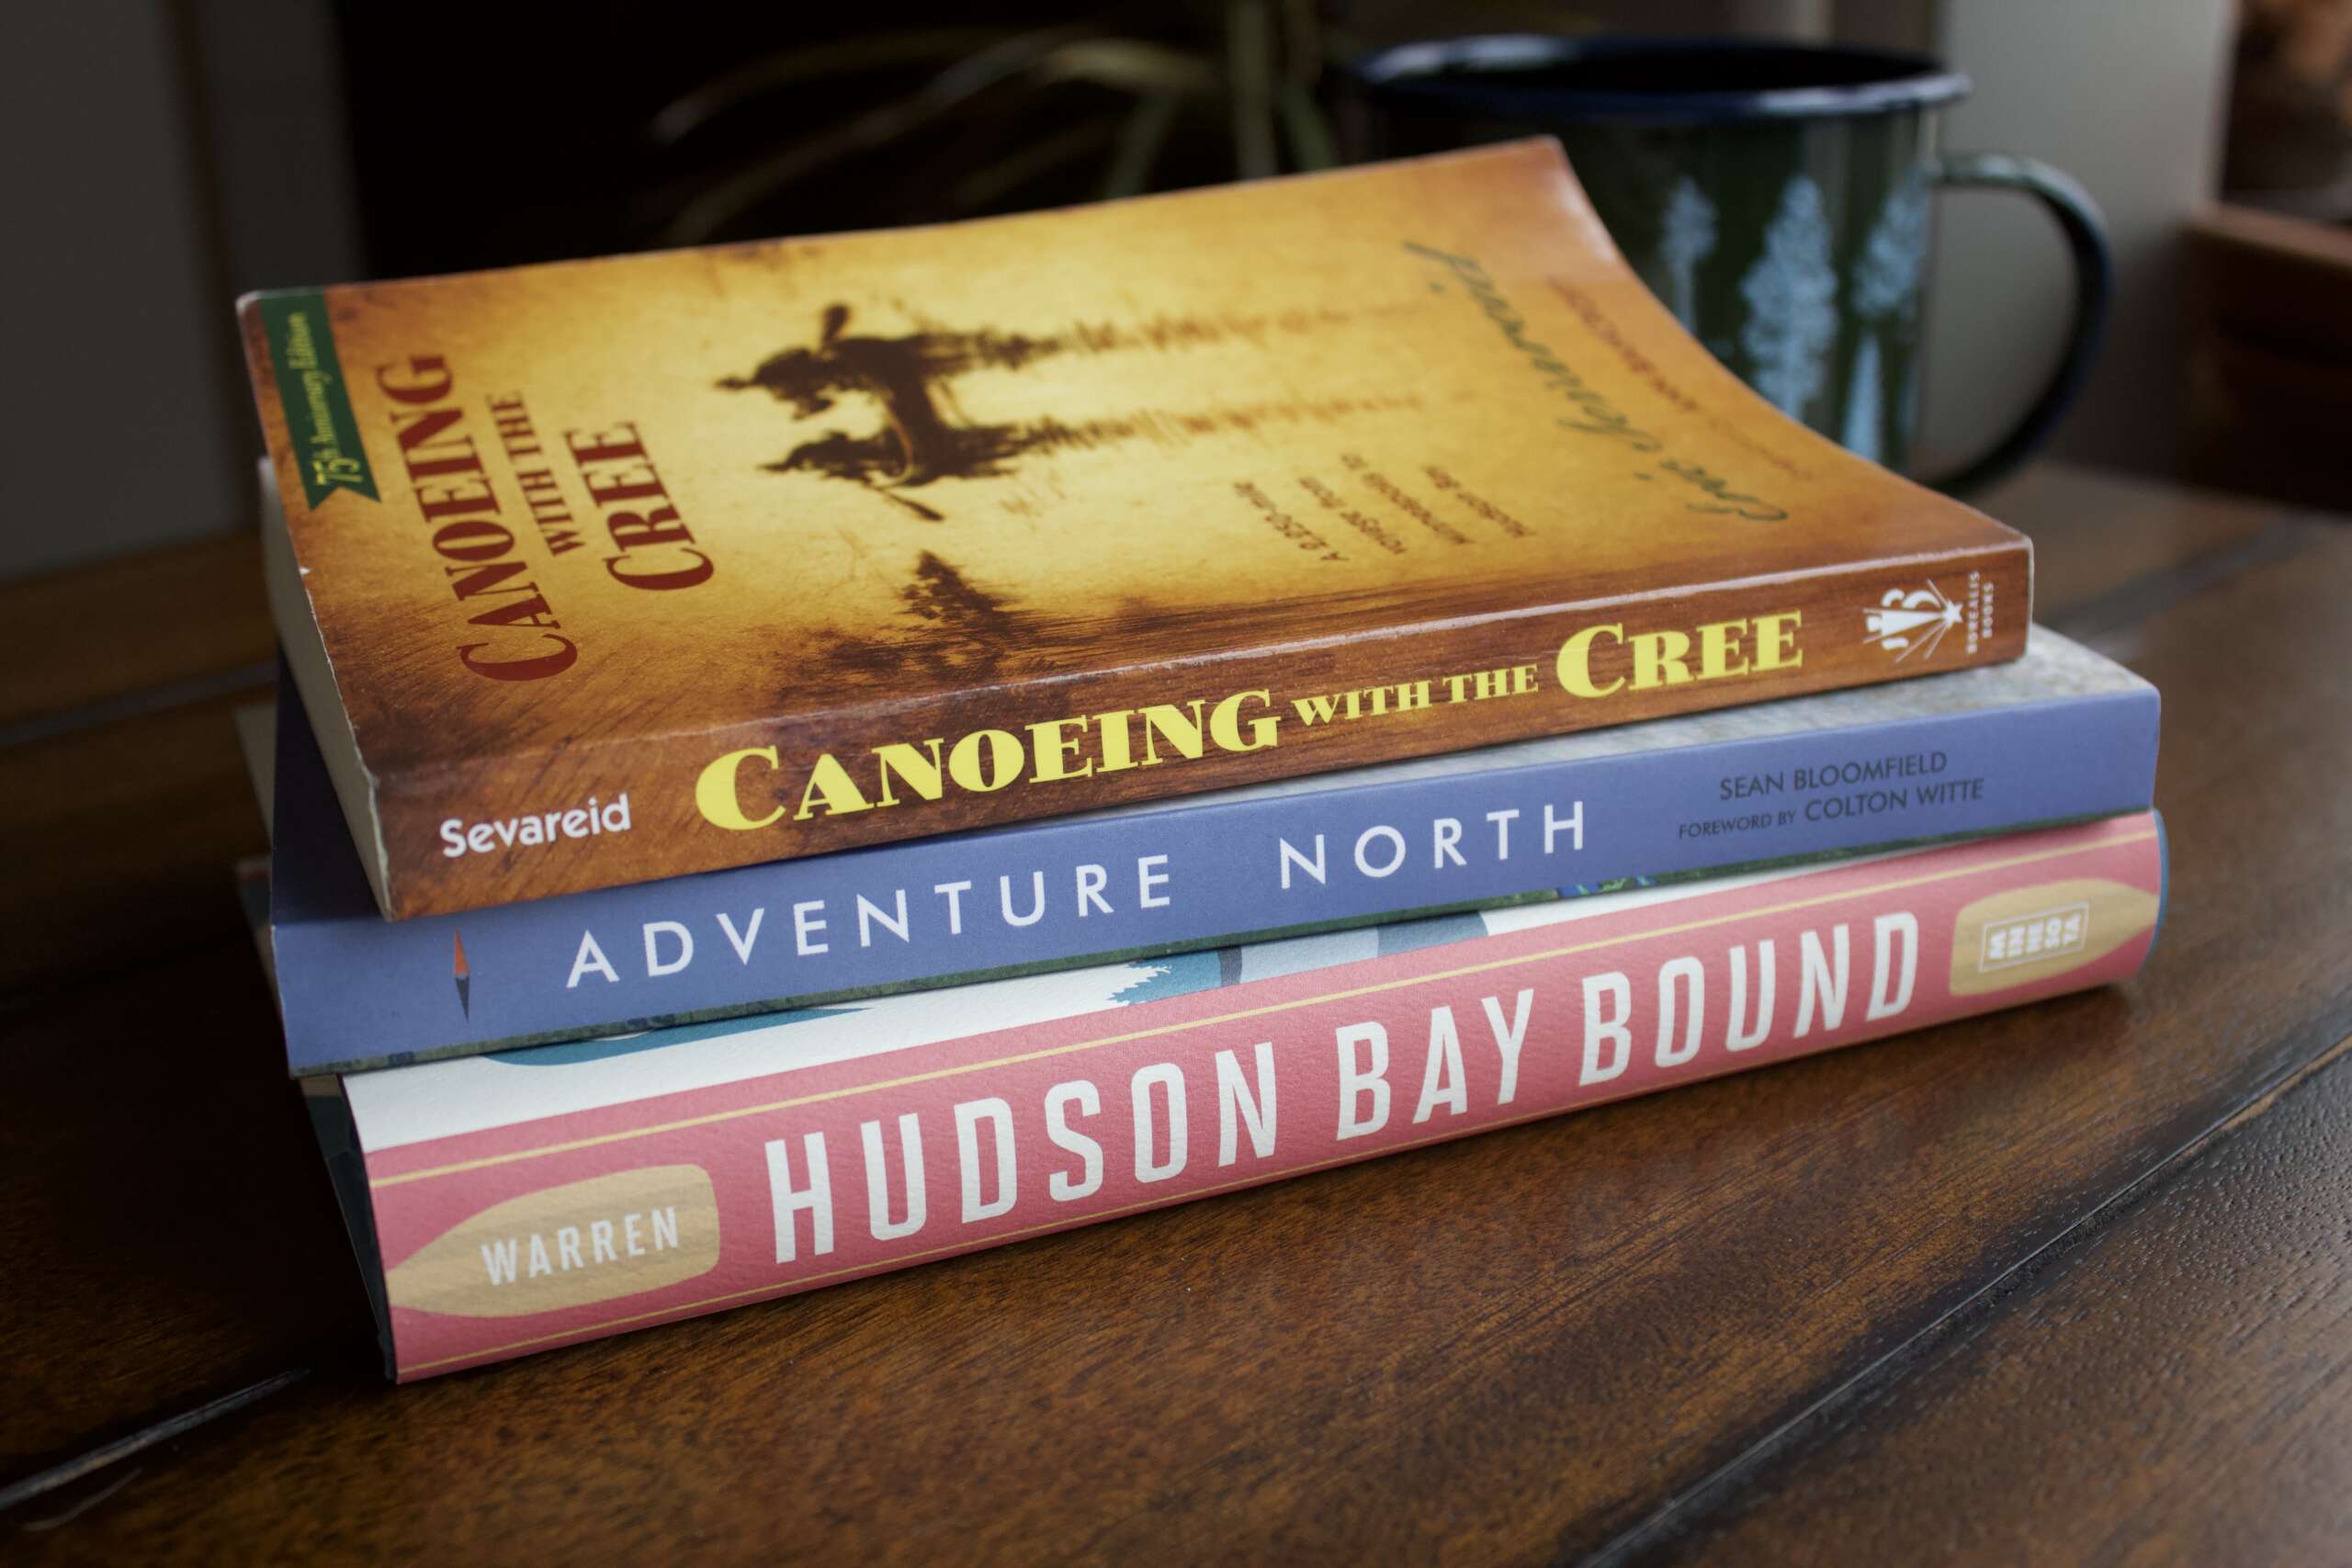 Three books, "Canoeing with the Cree", "Adventure North", and "Hudson Bay Bound" sit in a stack on a dark colored table